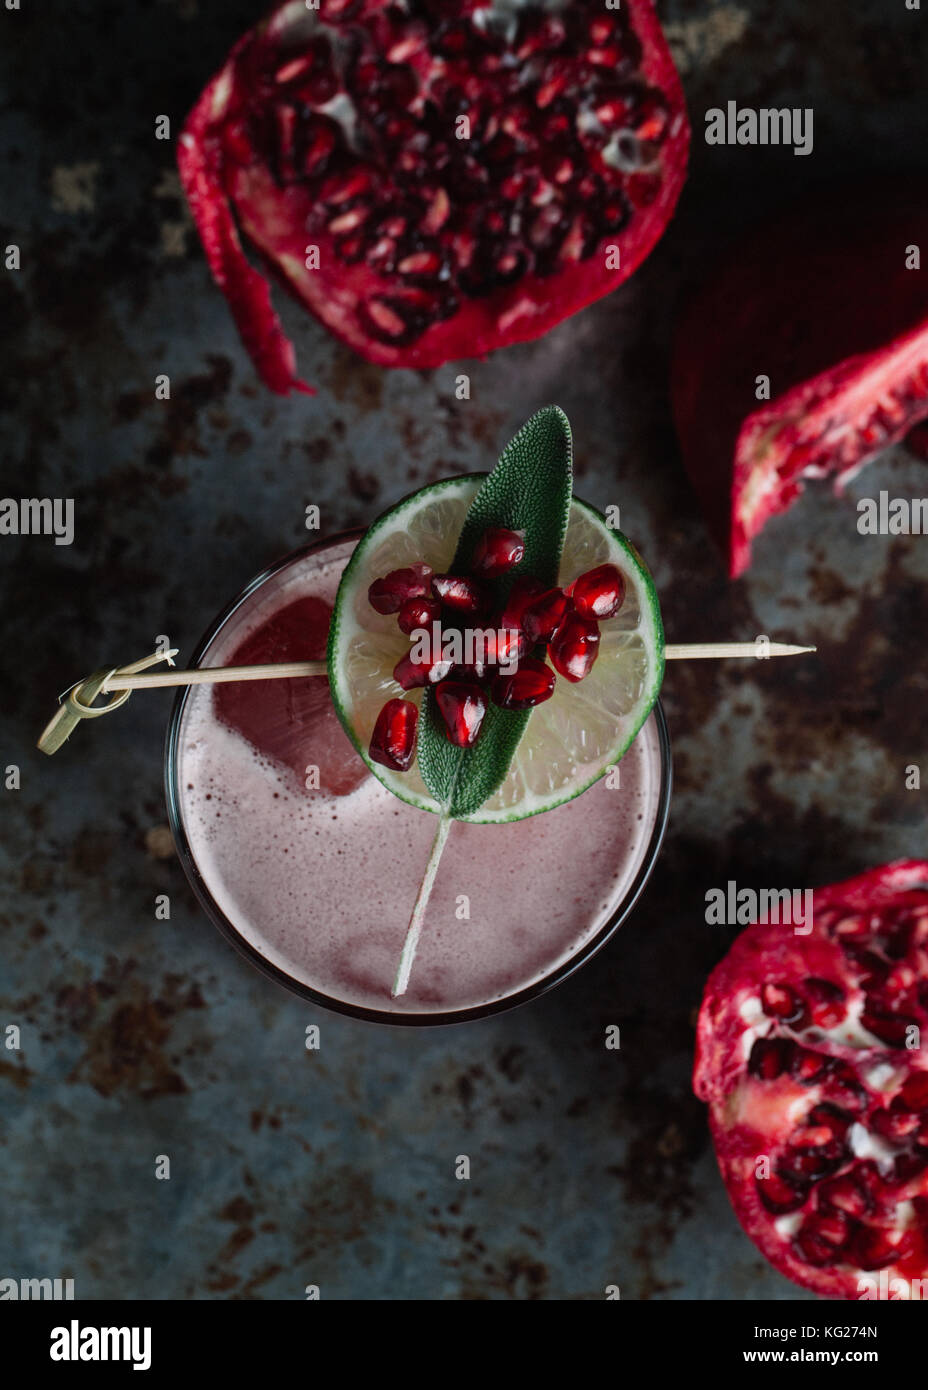 Alcoholic cocktail garnished with pomegranate seeds on dark moody background Stock Photo